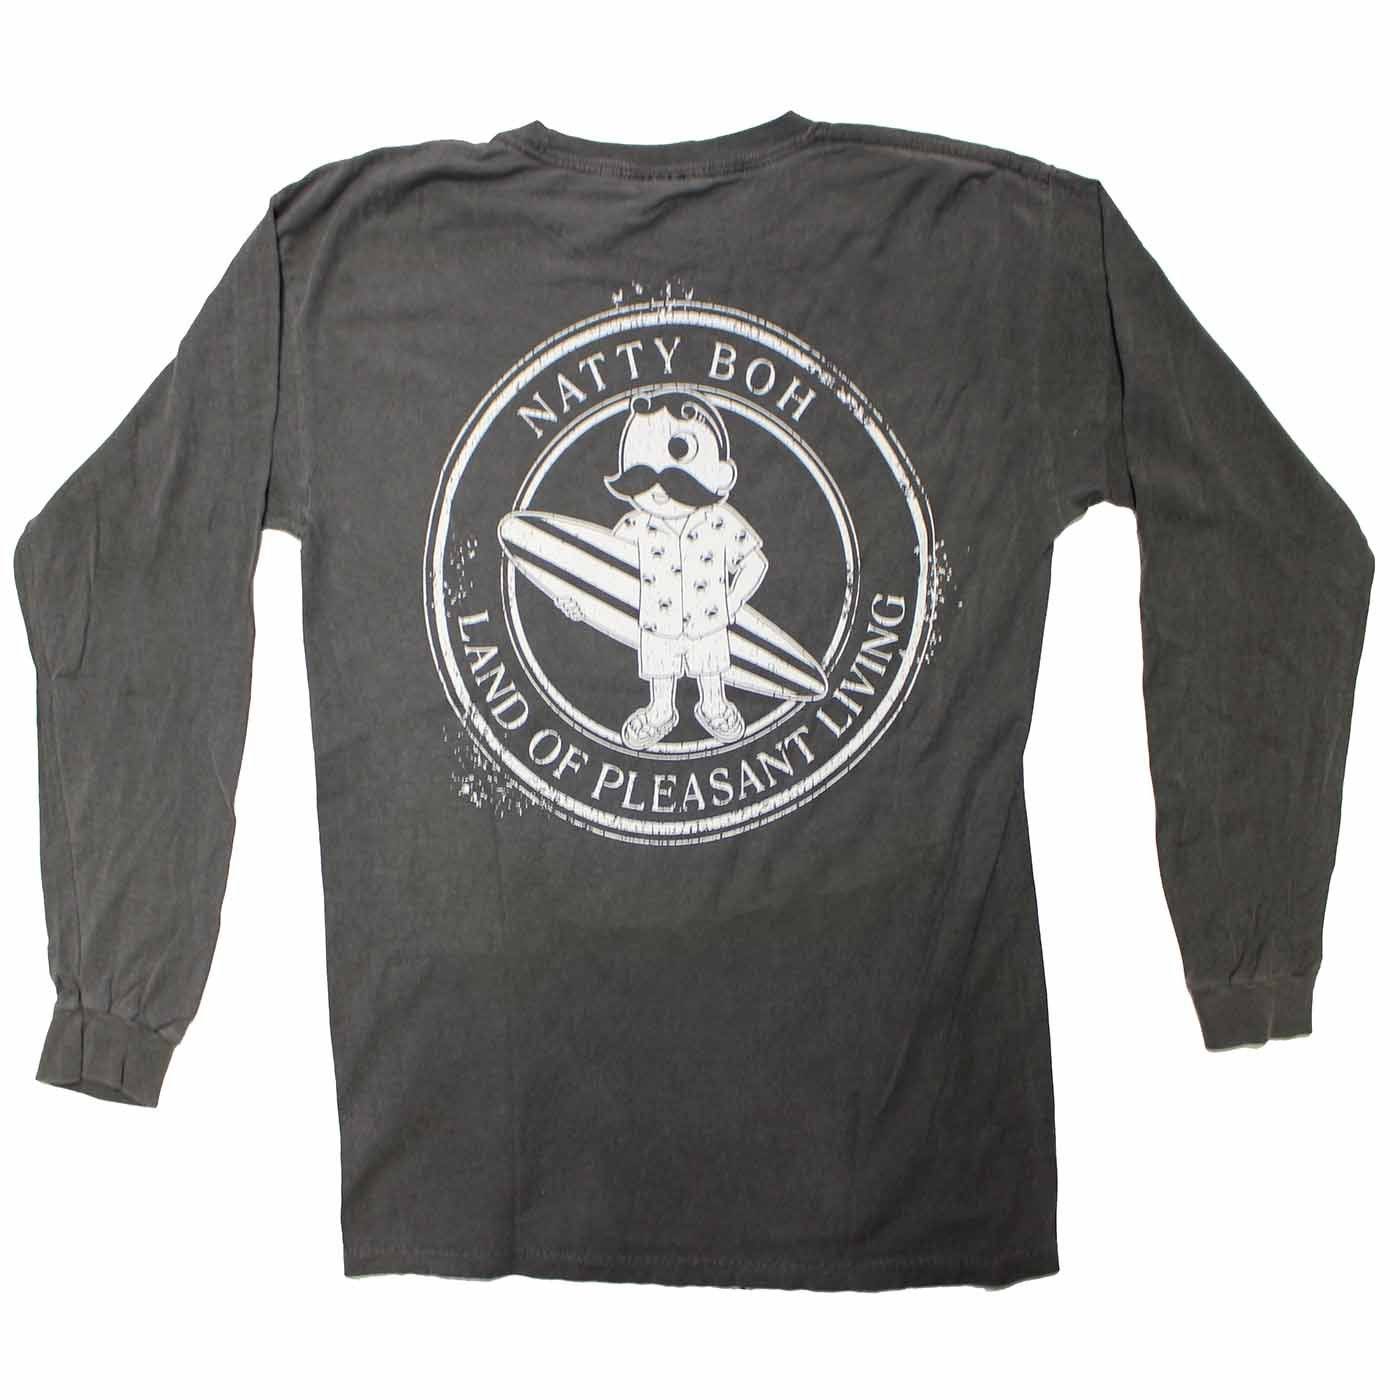 Natty Boh Surfer Dude Land of Pleasant Living (Pepper) / Long Sleeve Shirt - Route One Apparel